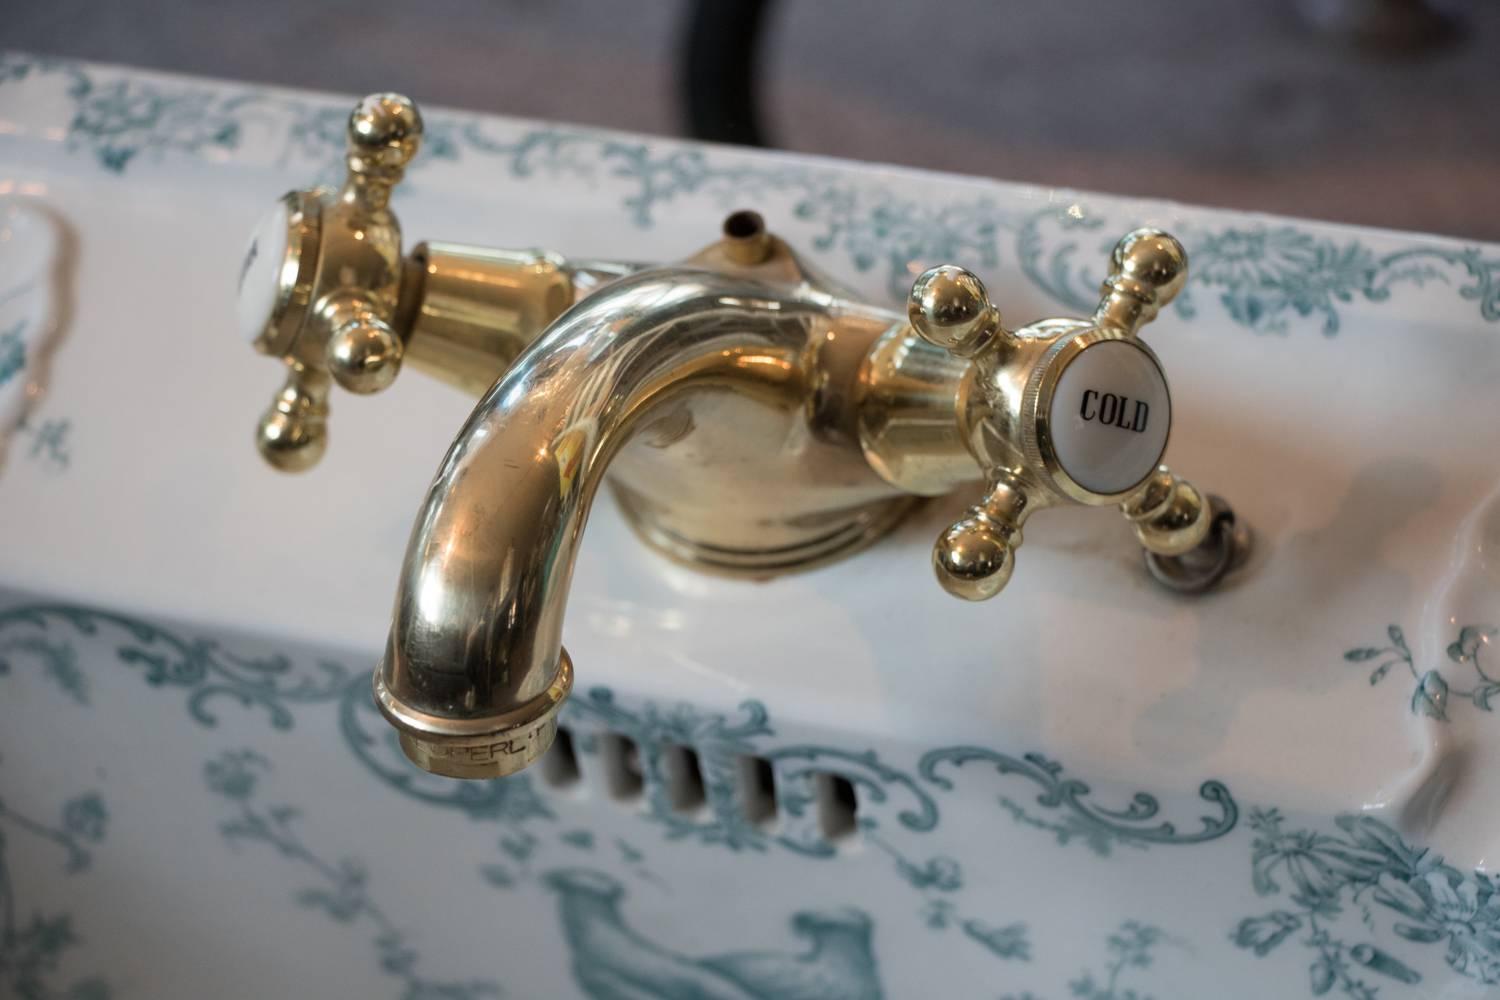 Magnificent 1862-1904 hand-painted cauldon porcelain sink with brass fixtures robin's egg blue art. Old world fixtures with modern brass solid beautifully smooth white porcelain with hand painted design in robin's egg blue or florals and love